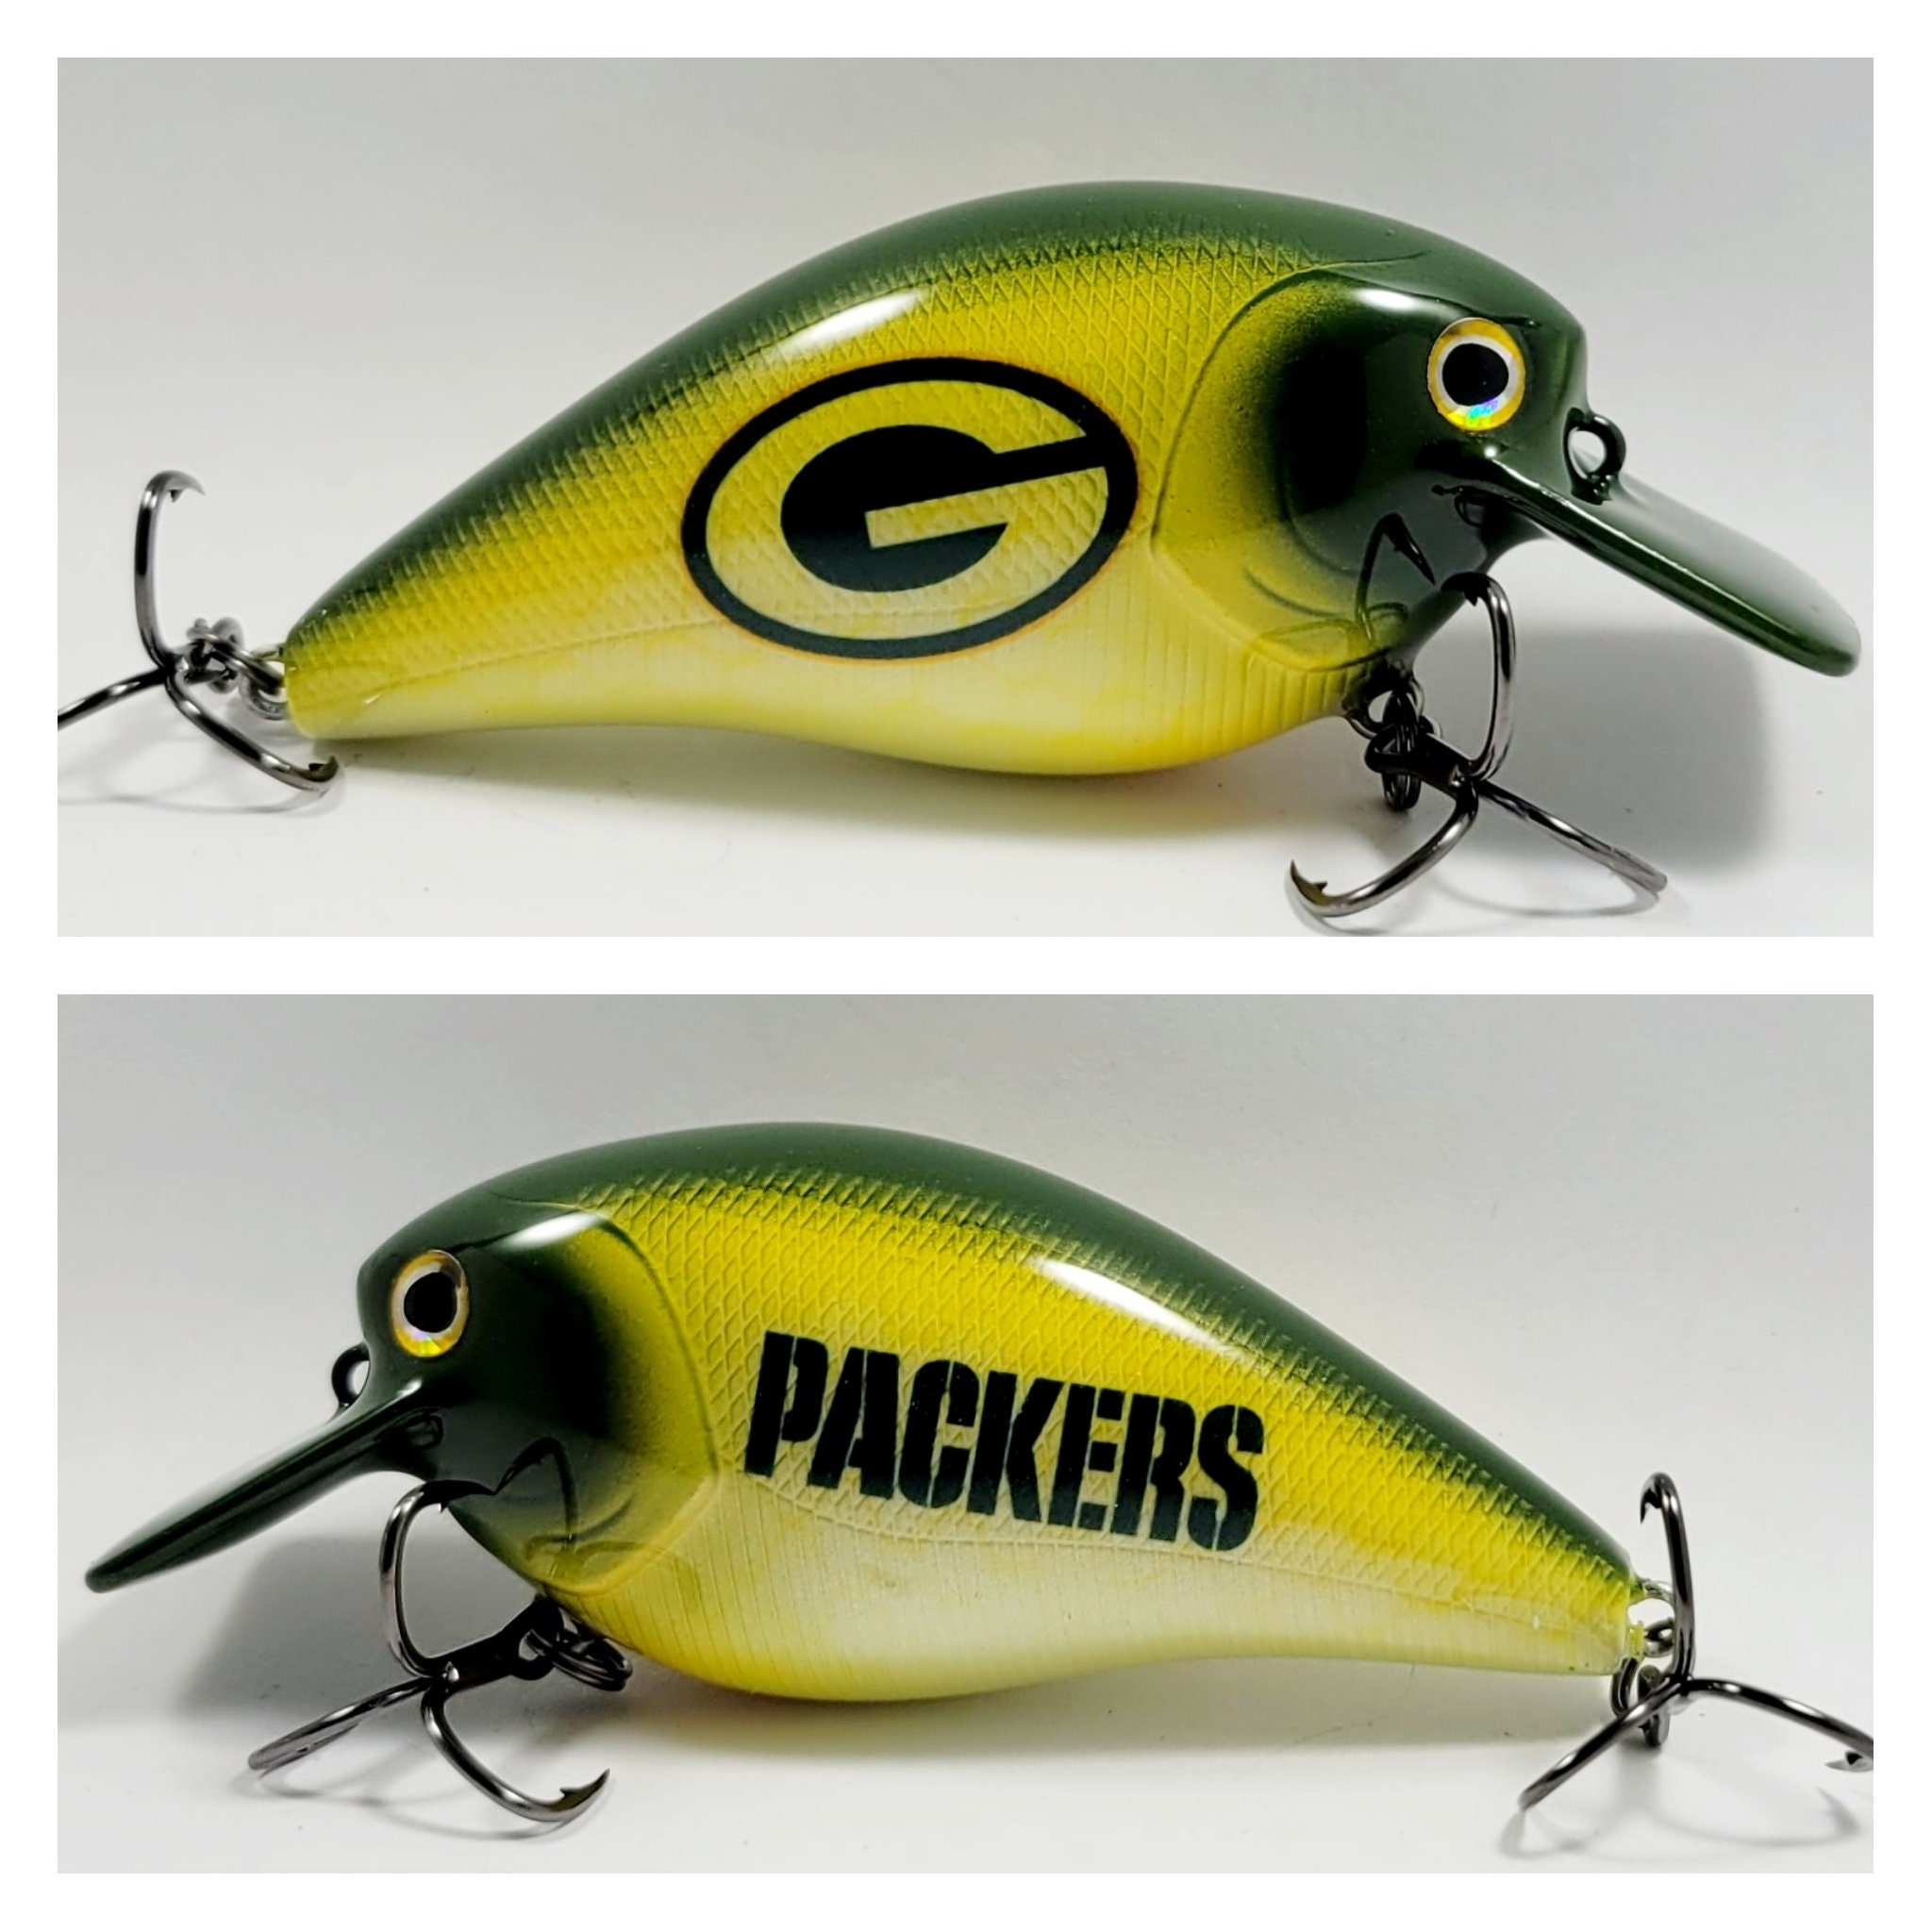 Custom Fishing Lures Make Great Fishing Gifts for Any Fisherman. Fishing  Gifts for Men Personalized for Any Occasion. 